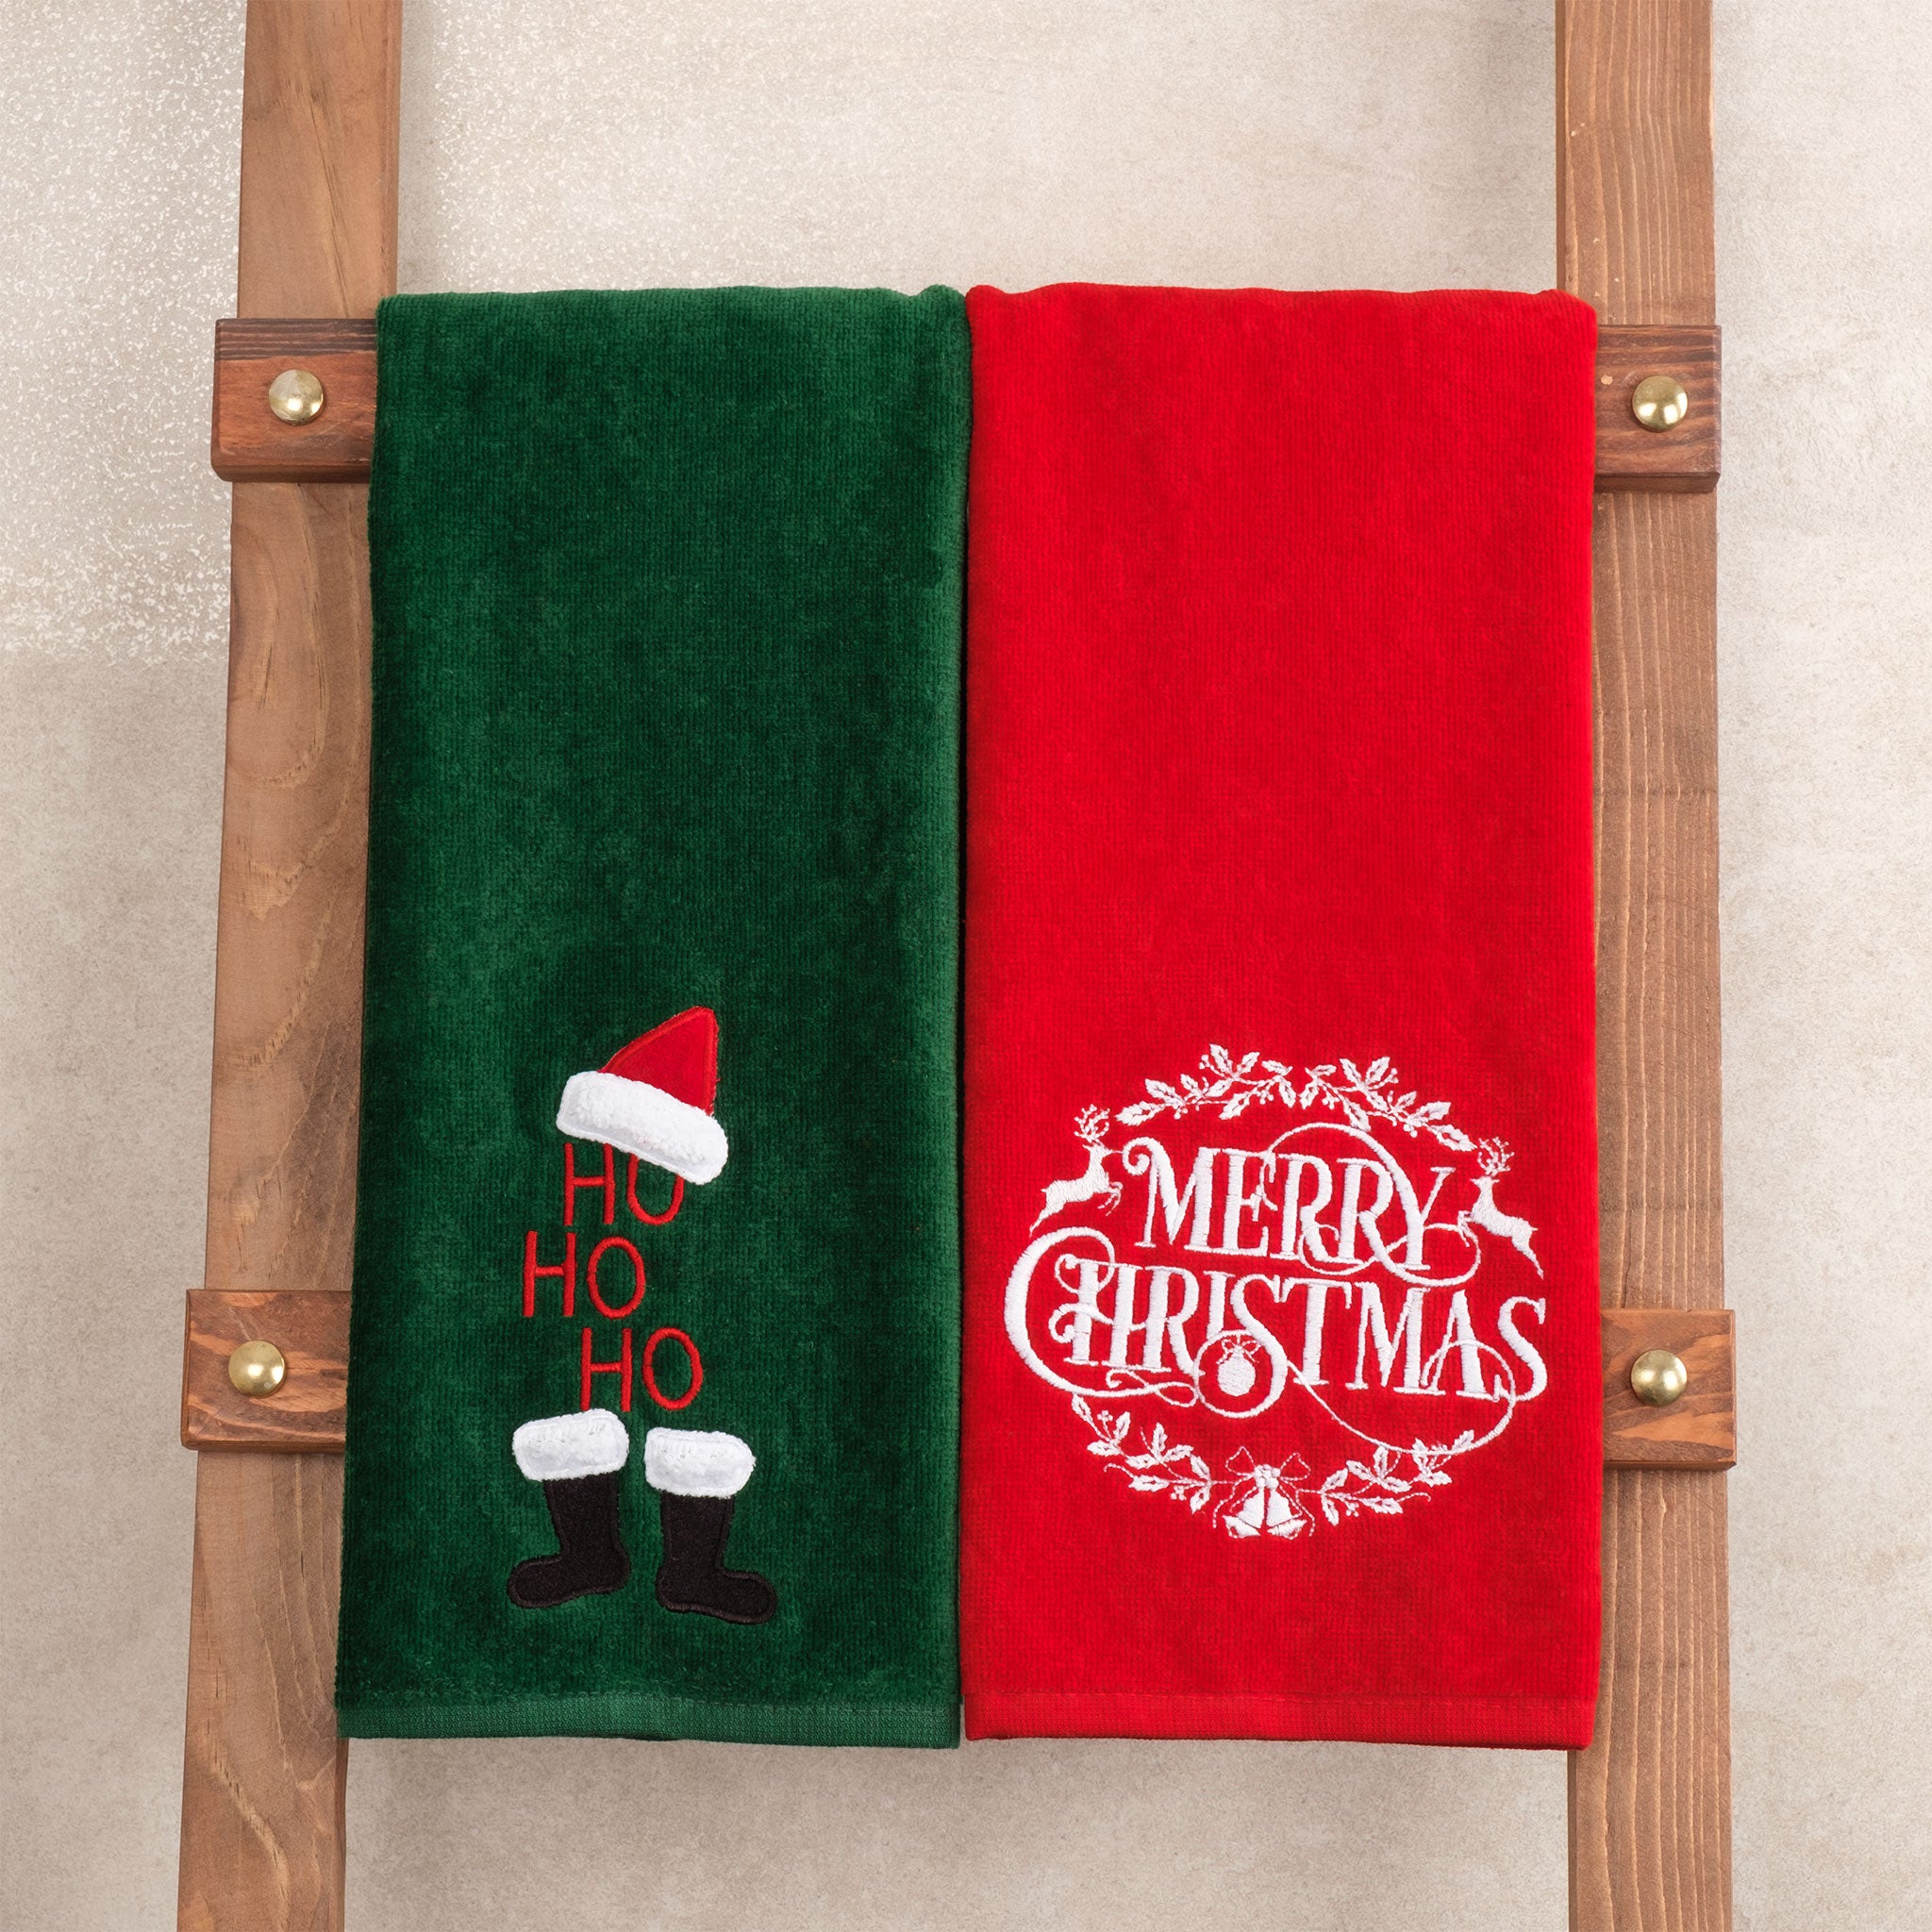 American Soft Linen - Christmas Towels 2 Packed Embroidered Towels for Decor Xmas - Merry-Hoho - 6